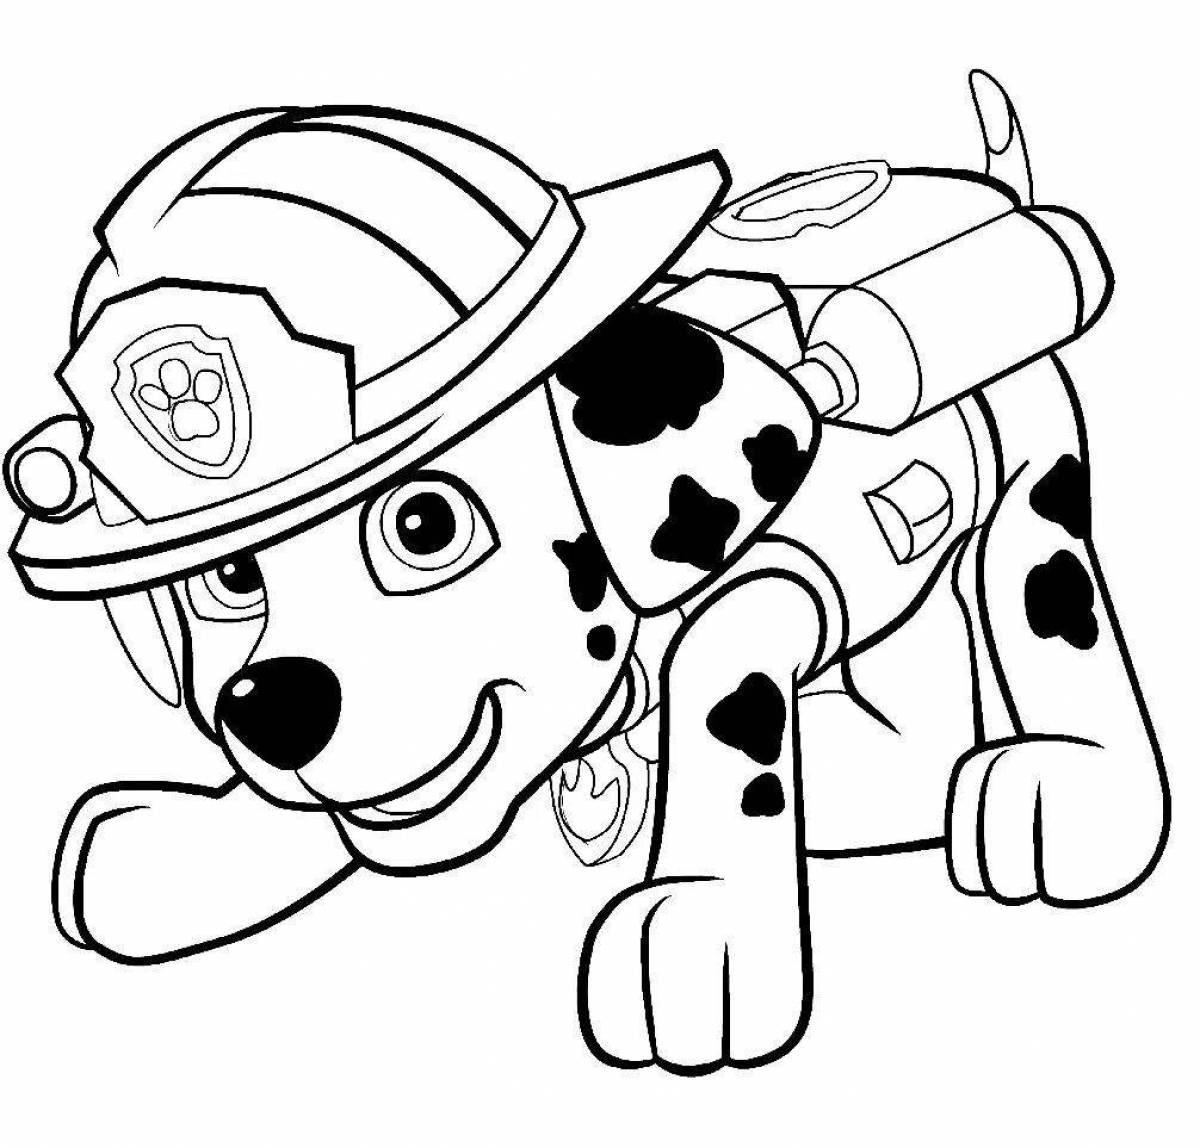 Coloring book excited fire dog